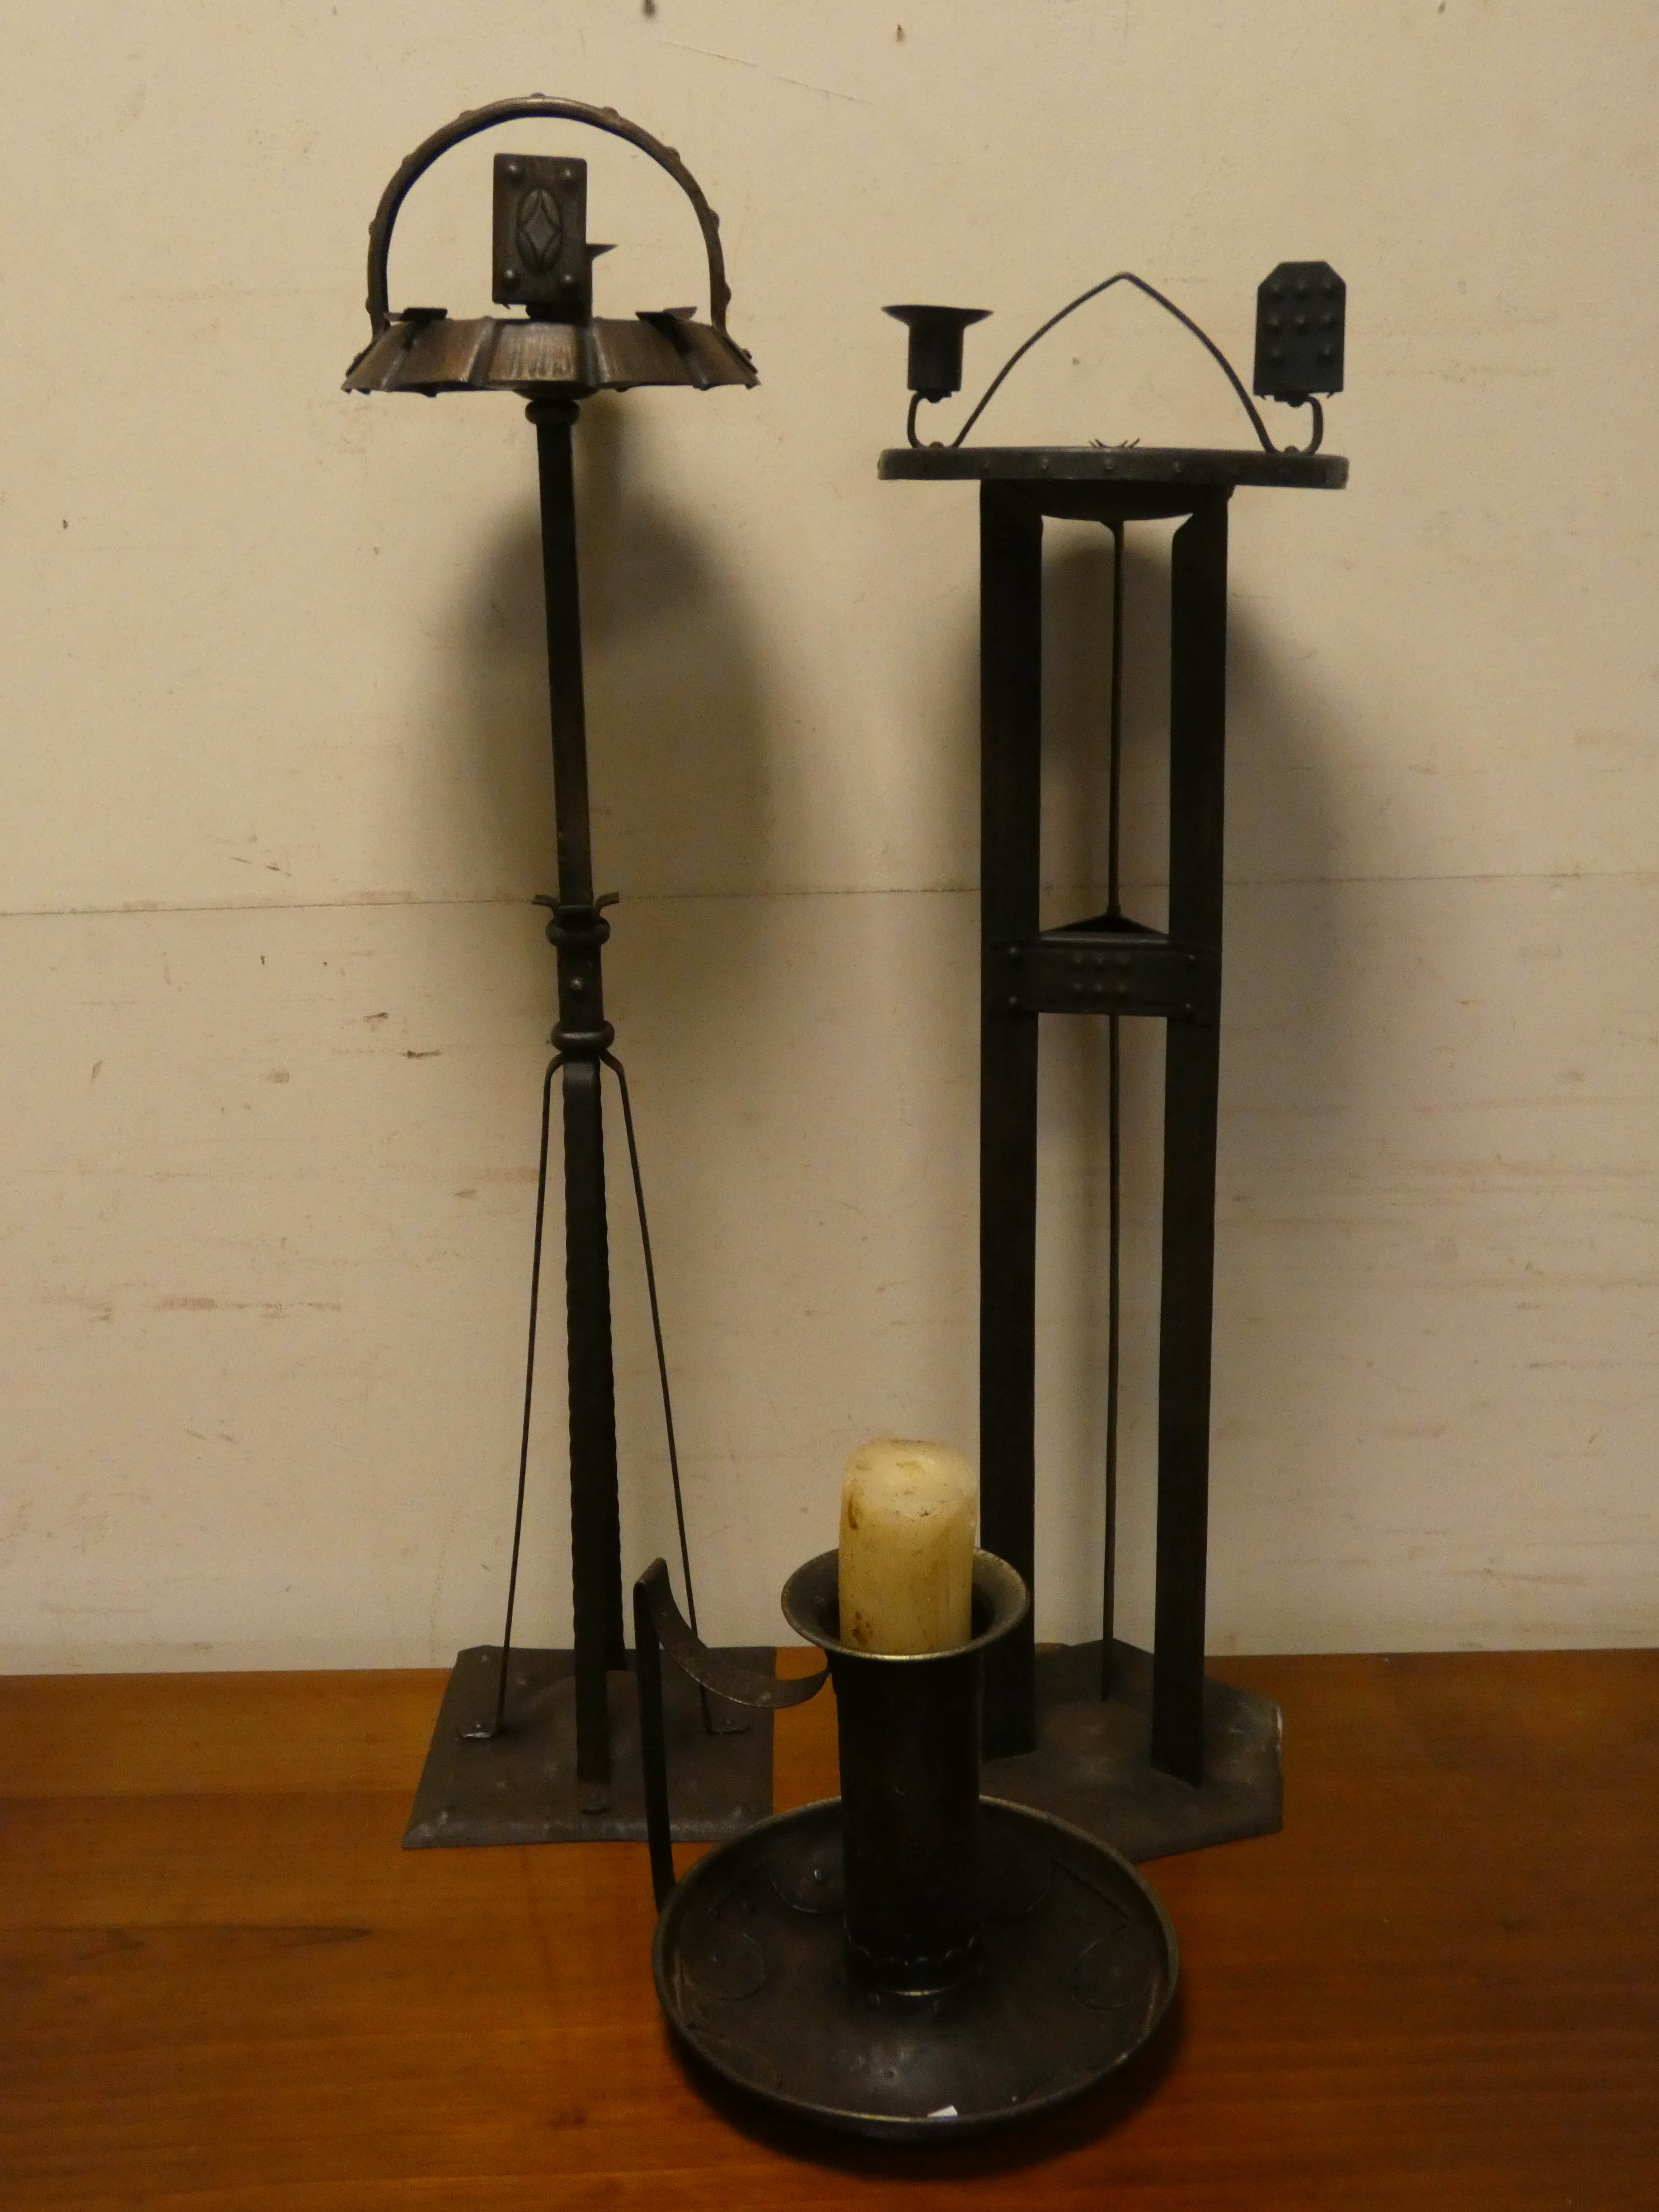 Two early 20th century metal smokers pedestals and a metal candlestick - Image 2 of 2